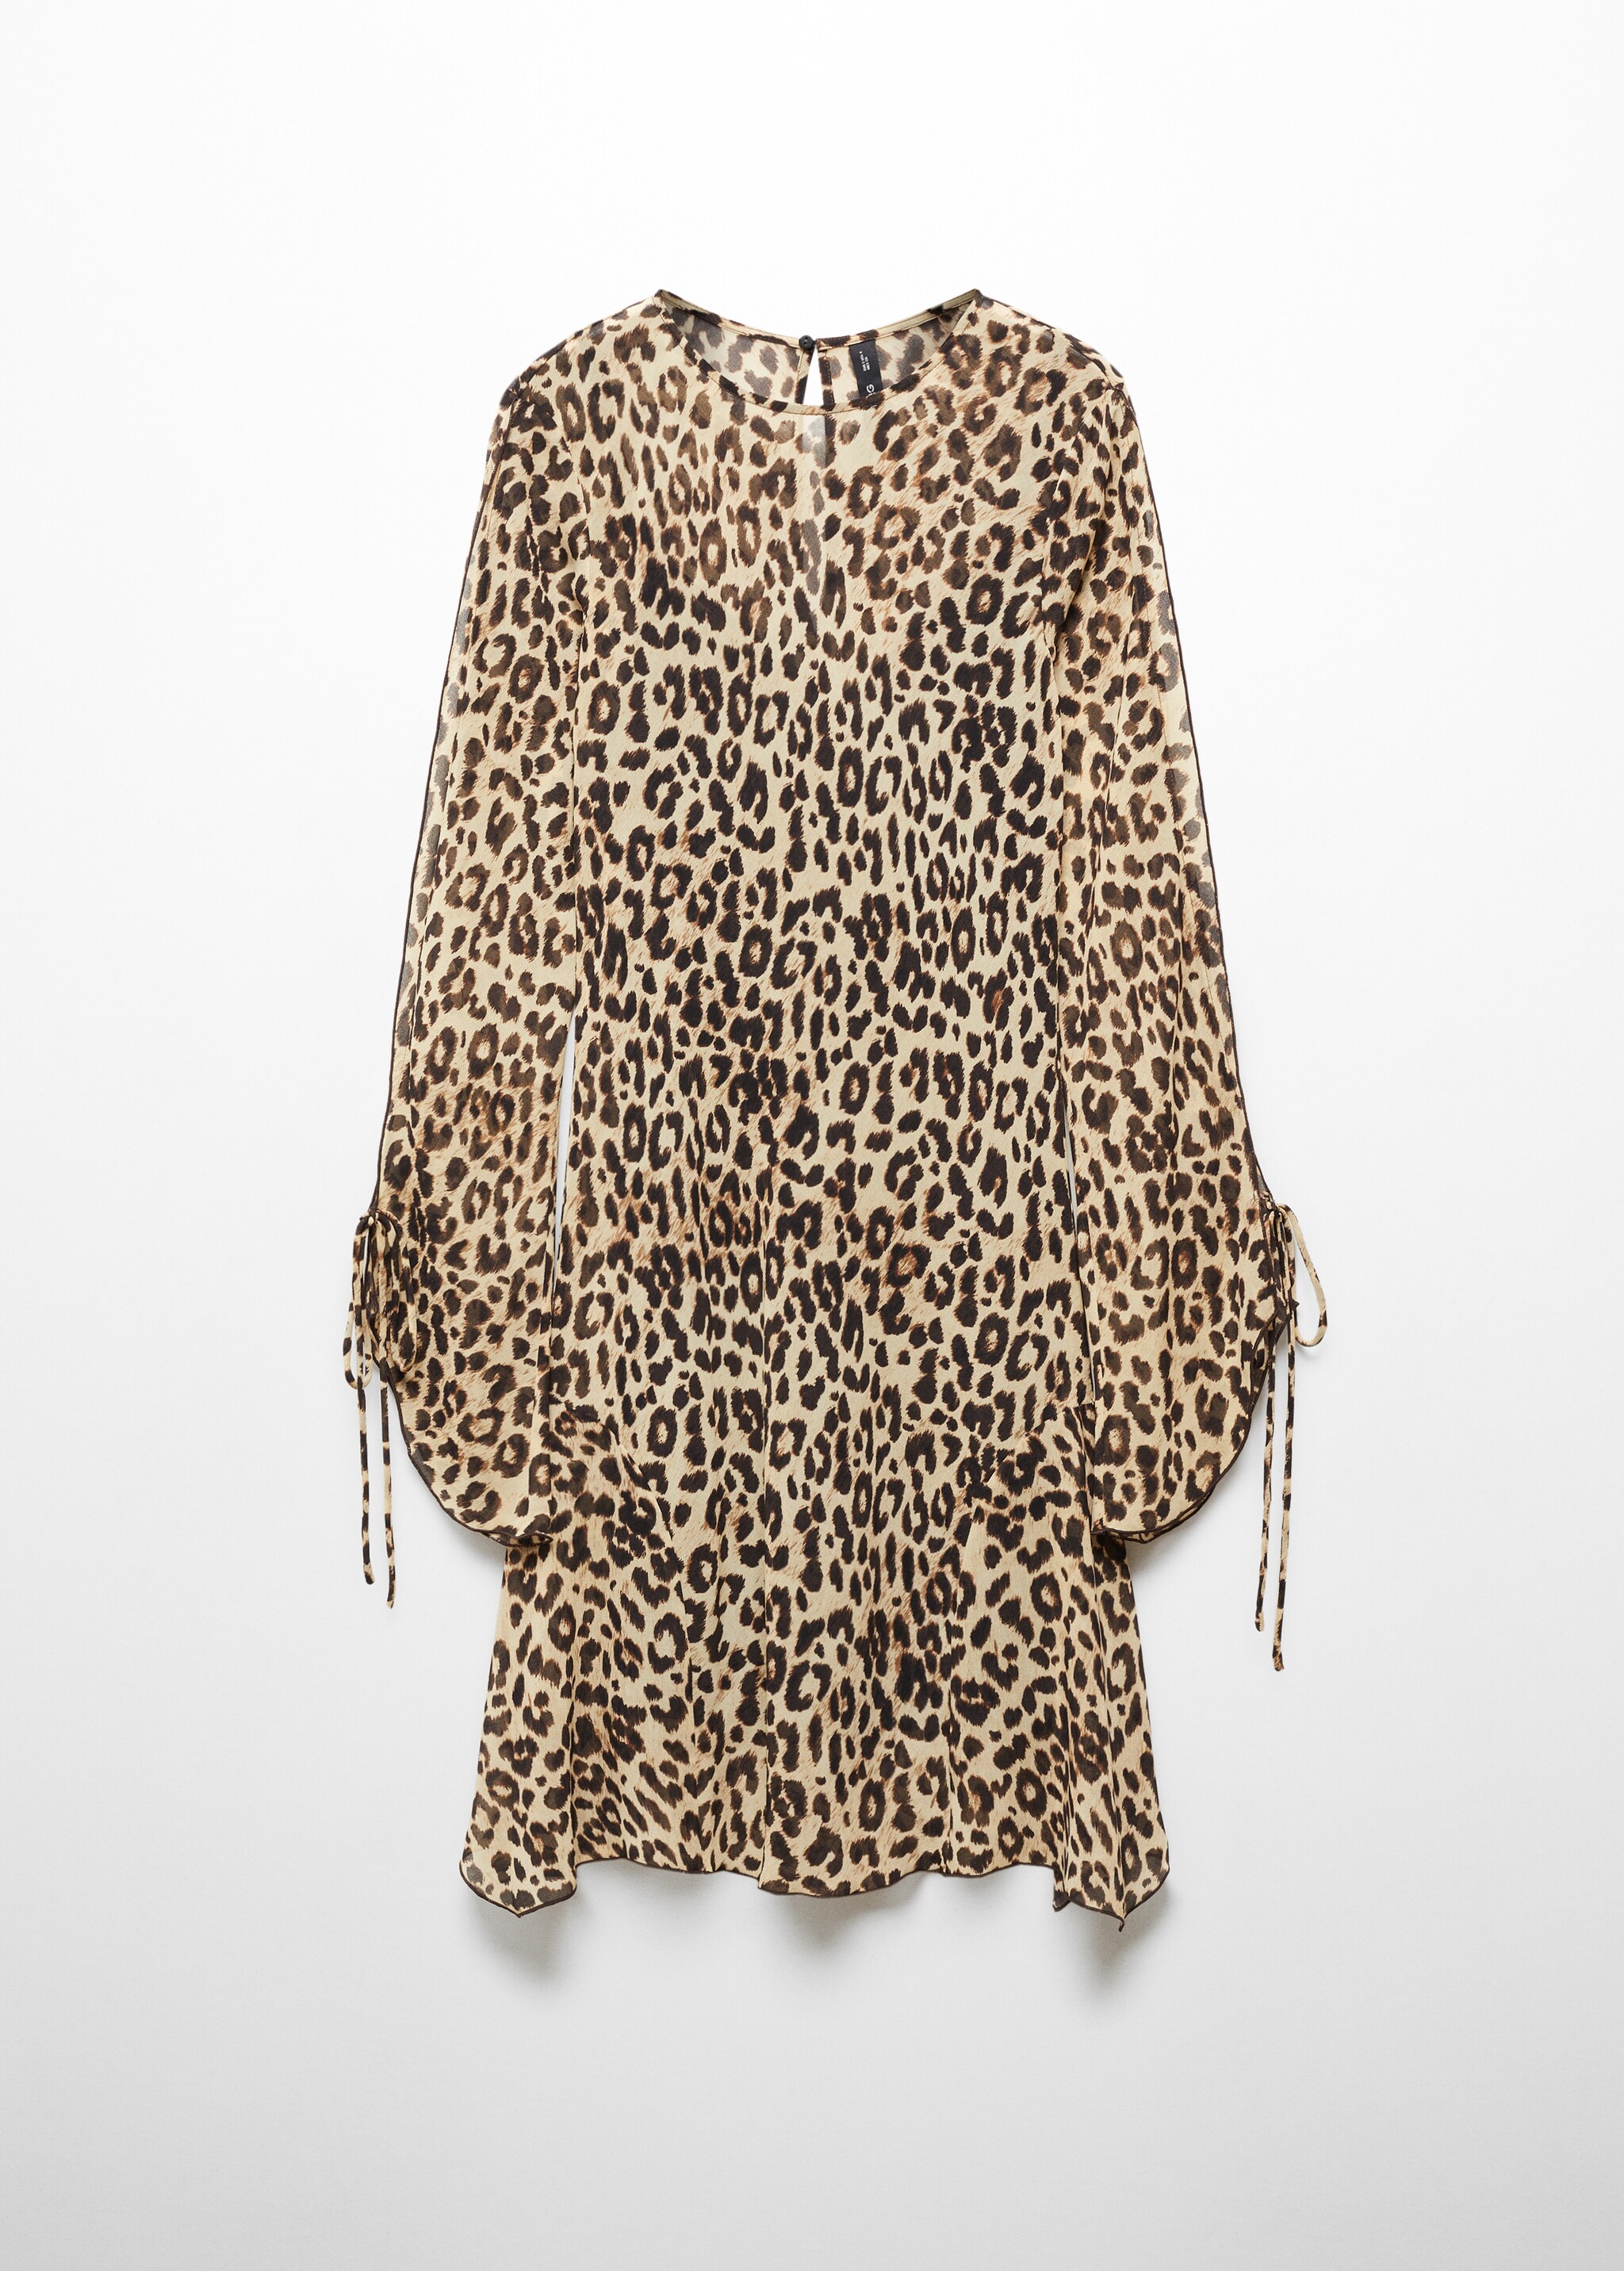 Animal-print fluid dress - Article without model